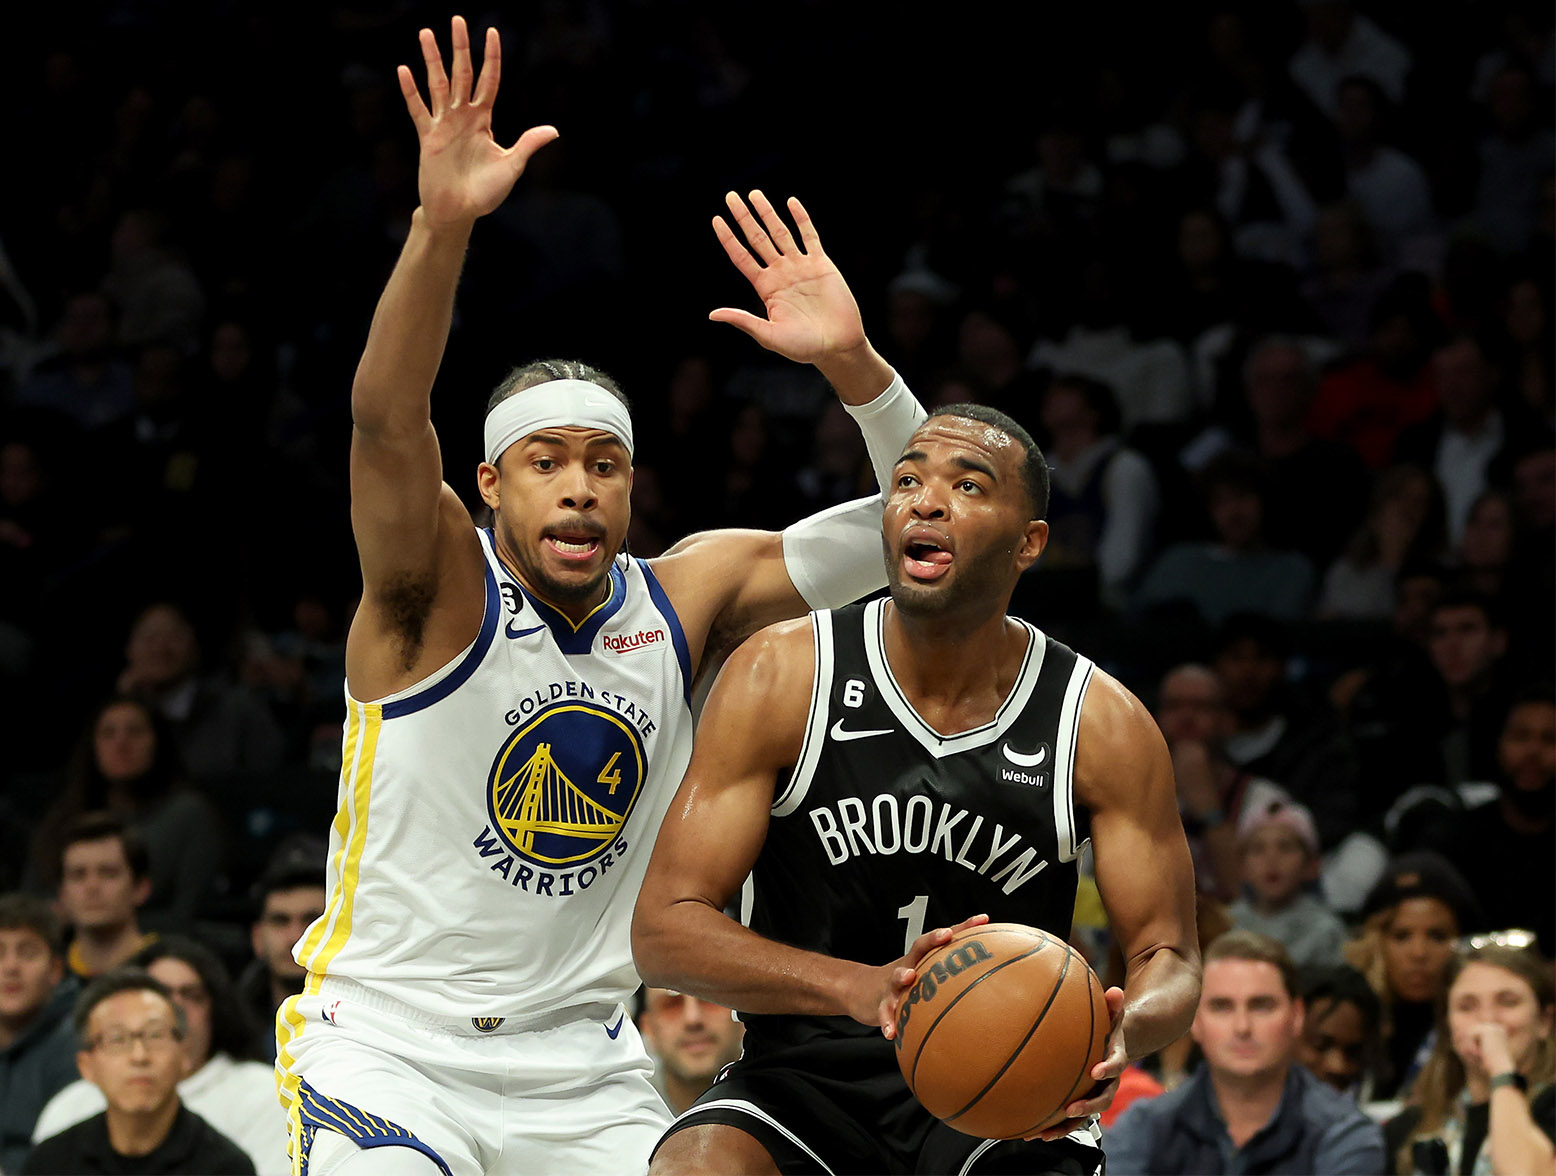 NEW YORK, NEW YORK - DECEMBER 21: T.J. Warren #1 of the Brooklyn Nets looks to shoot the ball against Moses Moody #4 of the Golden State Warriors during the first half of the game at Barclays Center on December 21, 2022 in the Brooklyn borough of New York City. NOTE TO USER: User expressly acknowledges and agrees that, by downloading and or using this photograph, User is consenting to the terms and conditions of the Getty Images License Agreement. (Photo by Sarah Stier/Getty Images)